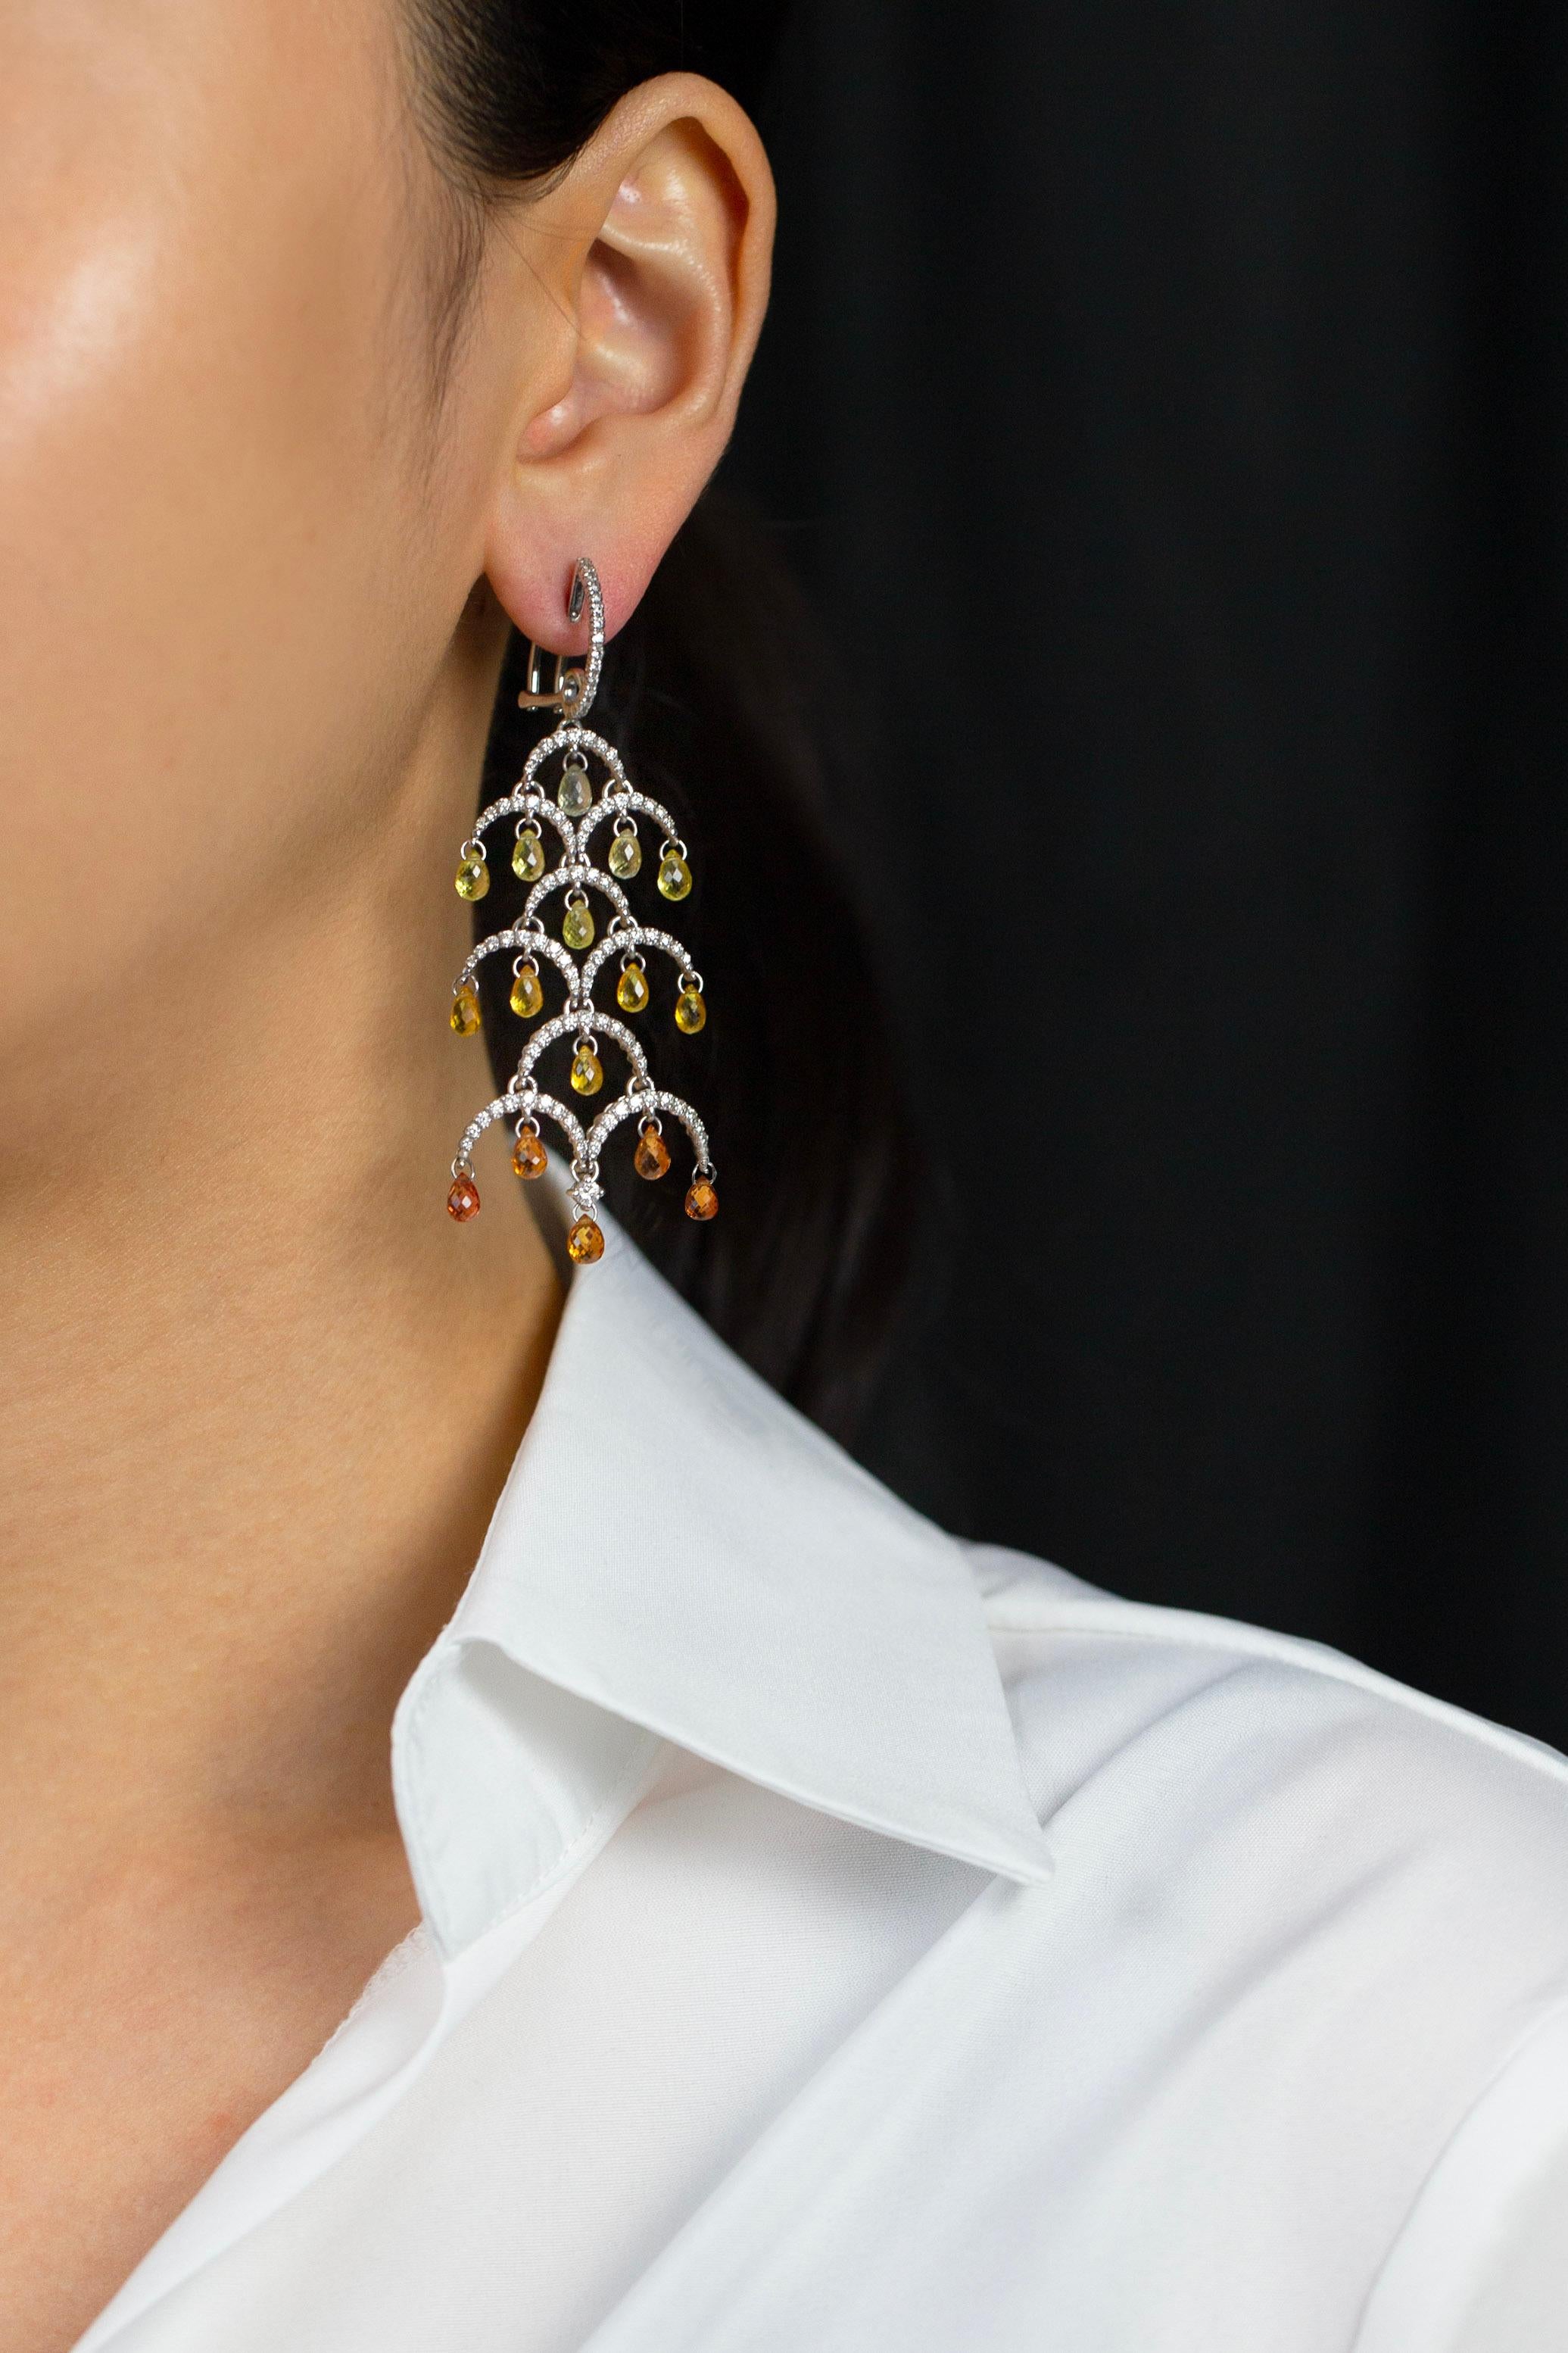 A delightful pair of chandelier earrings showcasing natural briolette orange sapphires graduating in color, suspended in a tree design accented with round diamonds. Diamonds weigh 1.97 carats total. Perfectly made in 18K White Gold. 

Style